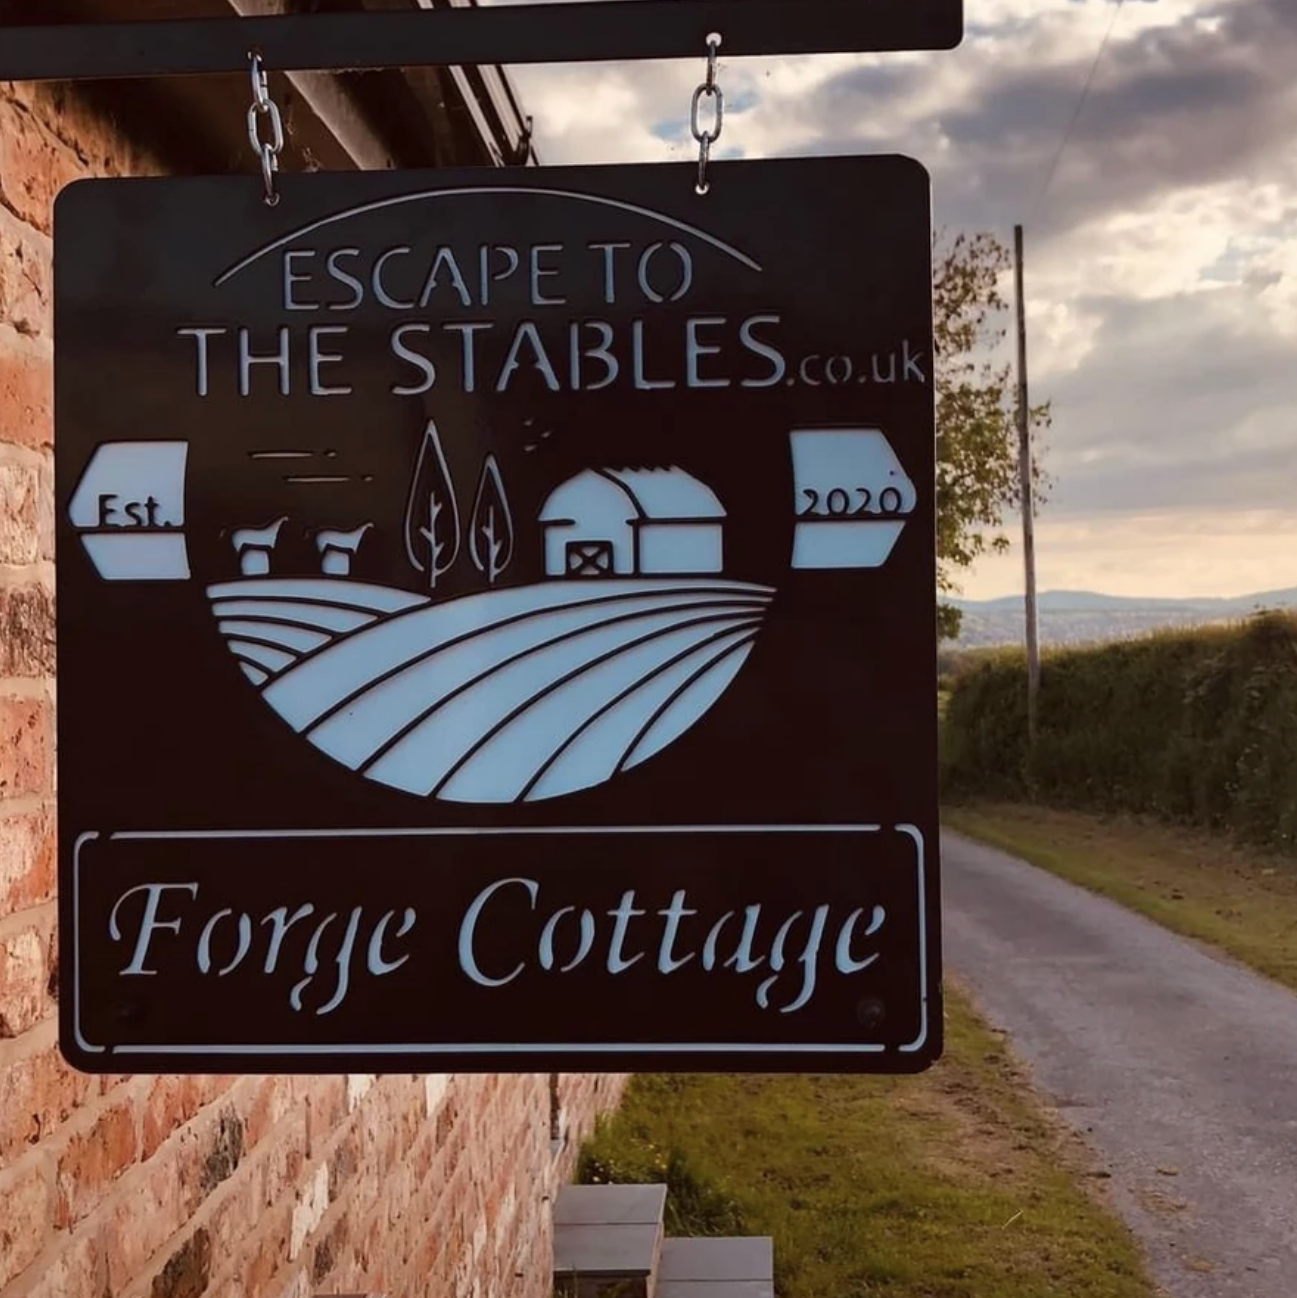 Forge Cottage eBike Drop off & Collection